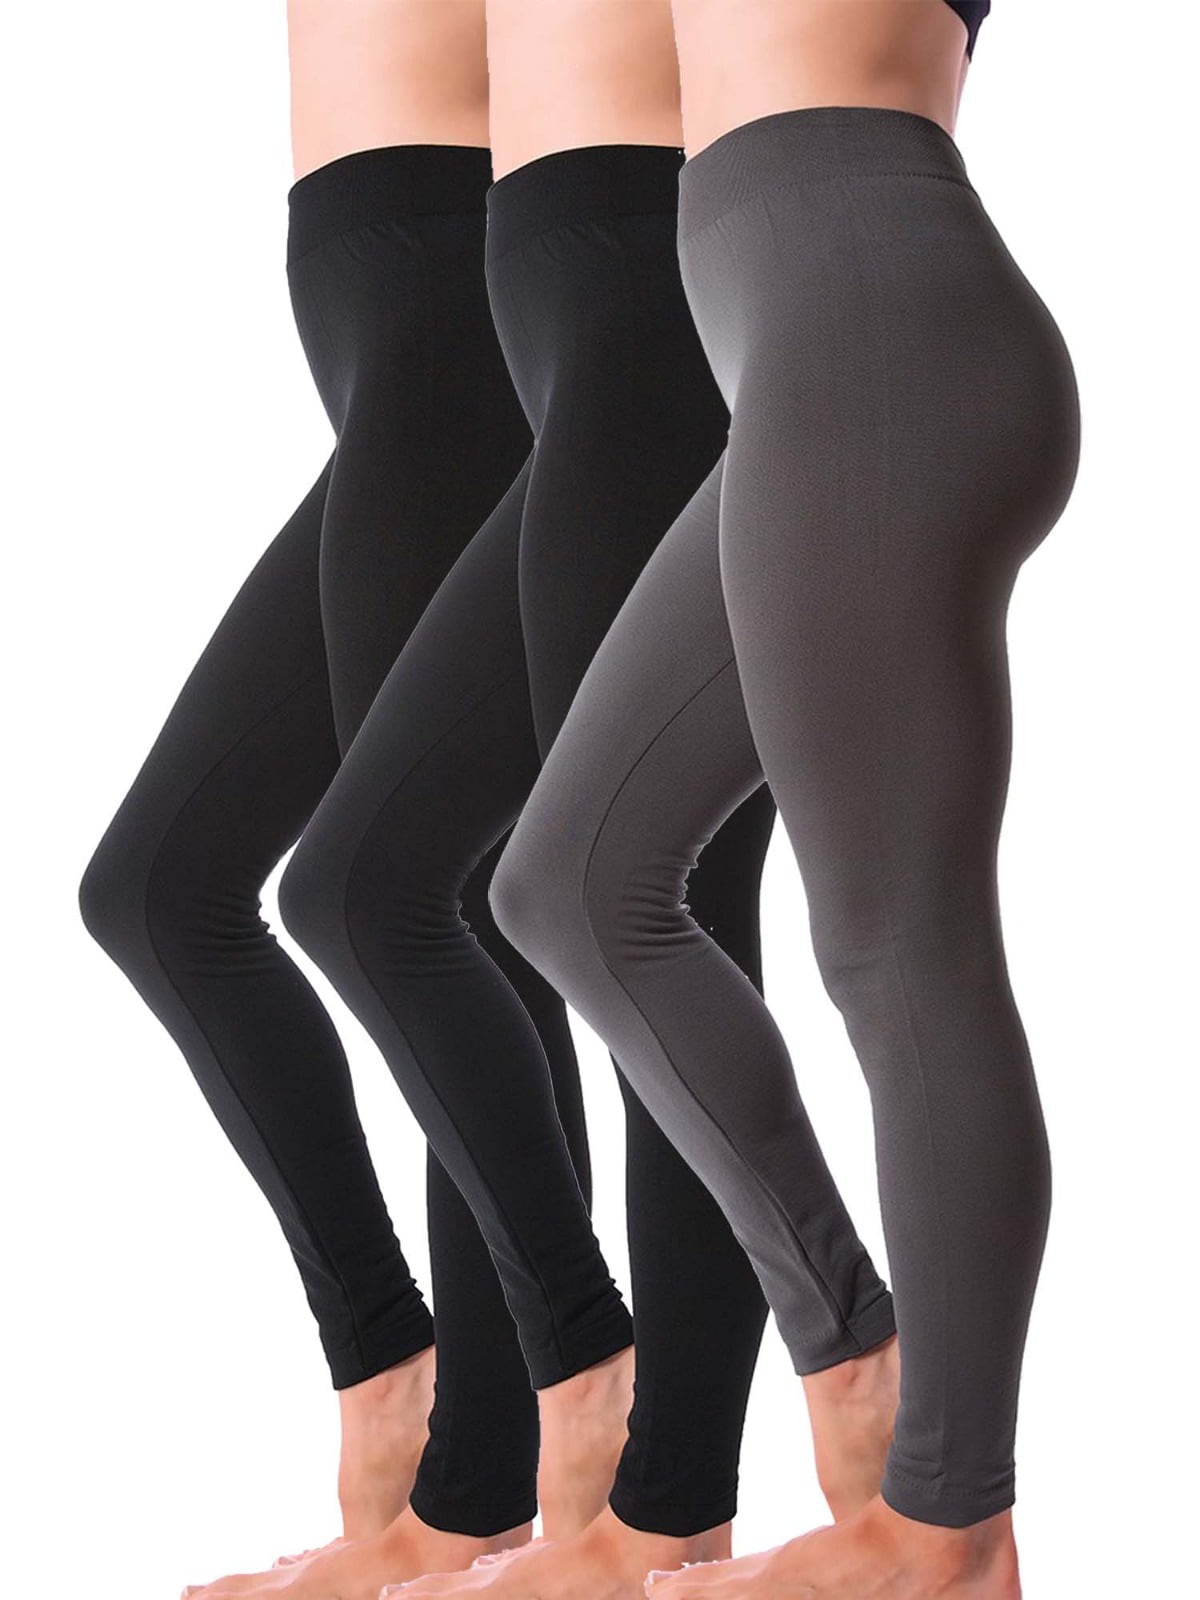 Lace Leggings Plus Size Plus Size Fleece Lined Leggings Winter Pants for  Women Workout Leggings Brown Leggings Near Me Tights Womens Knit Dresses  for Women Insulated Tights Cream Colored Tights at